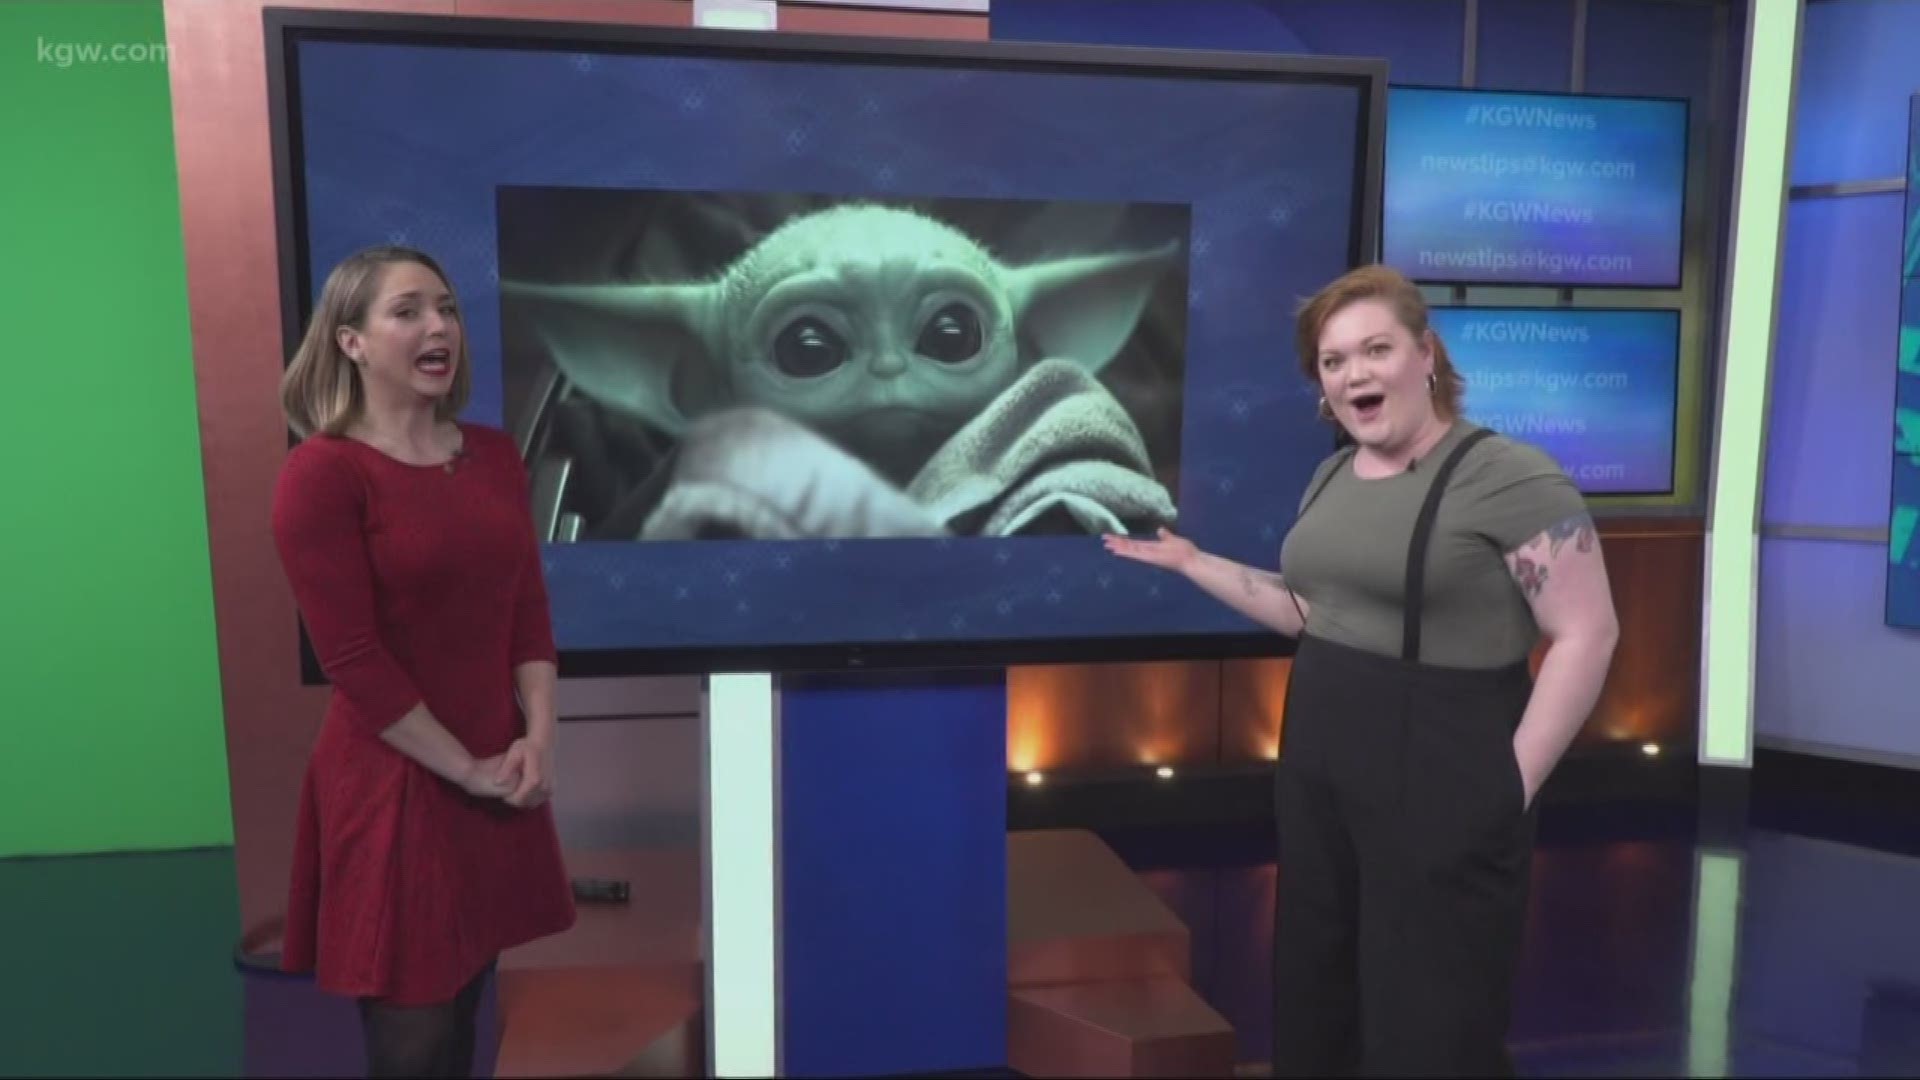 Baby Yoda and 4-words arguments have the internet crying this week!
#TonightwithCassidy